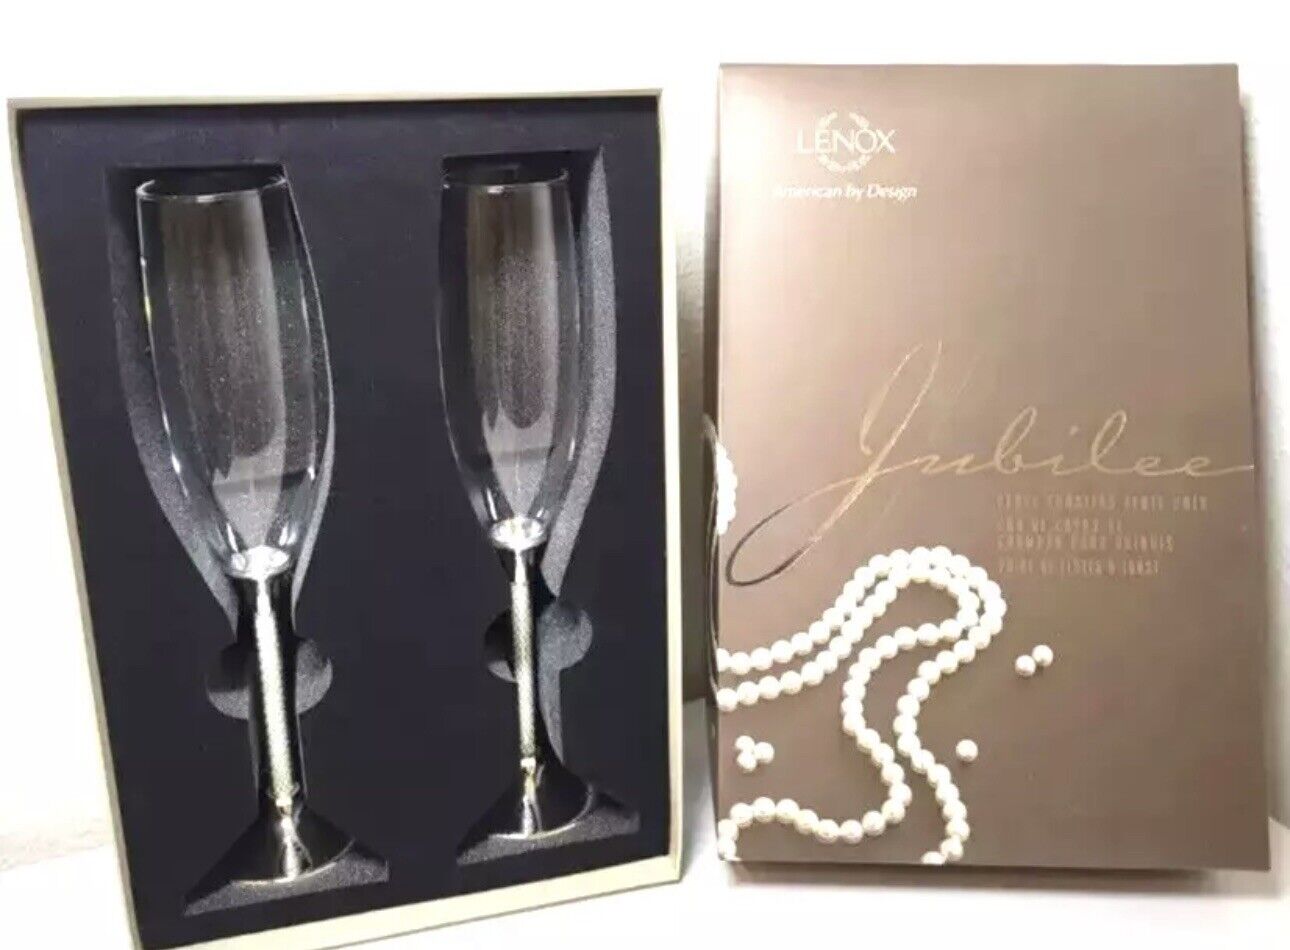 Lenox Jubilee Pearl Champagne Toasting Flutes With Box Brand New Never Used